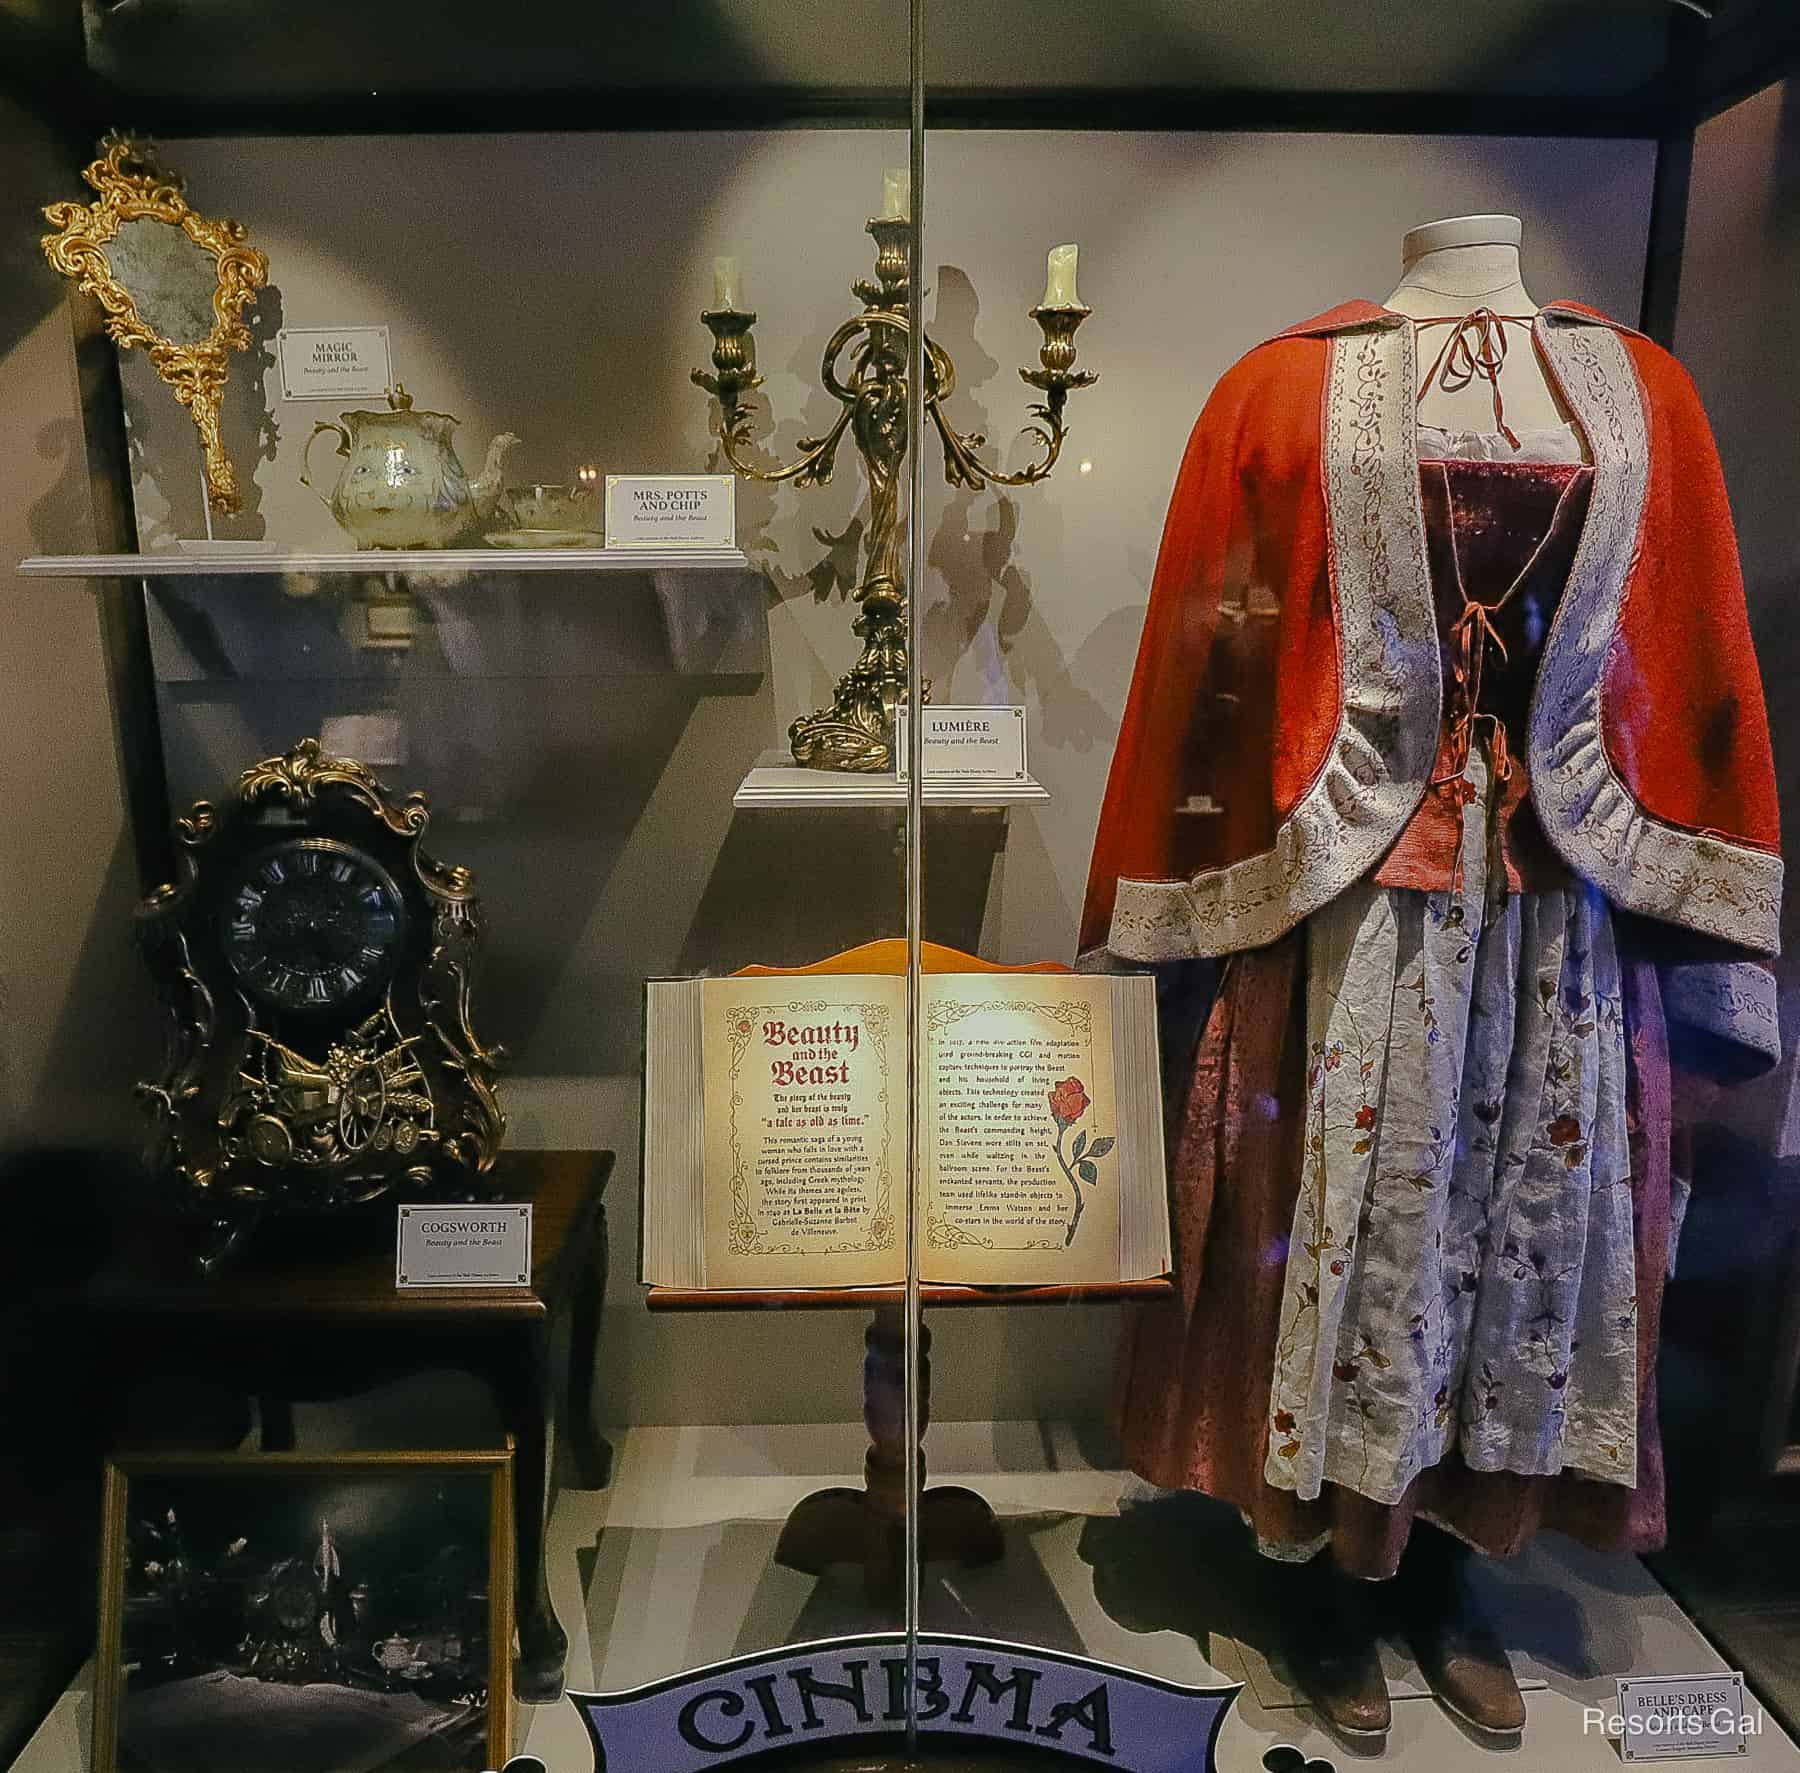 display case with a dress, the mirror, and other items from the live-action film